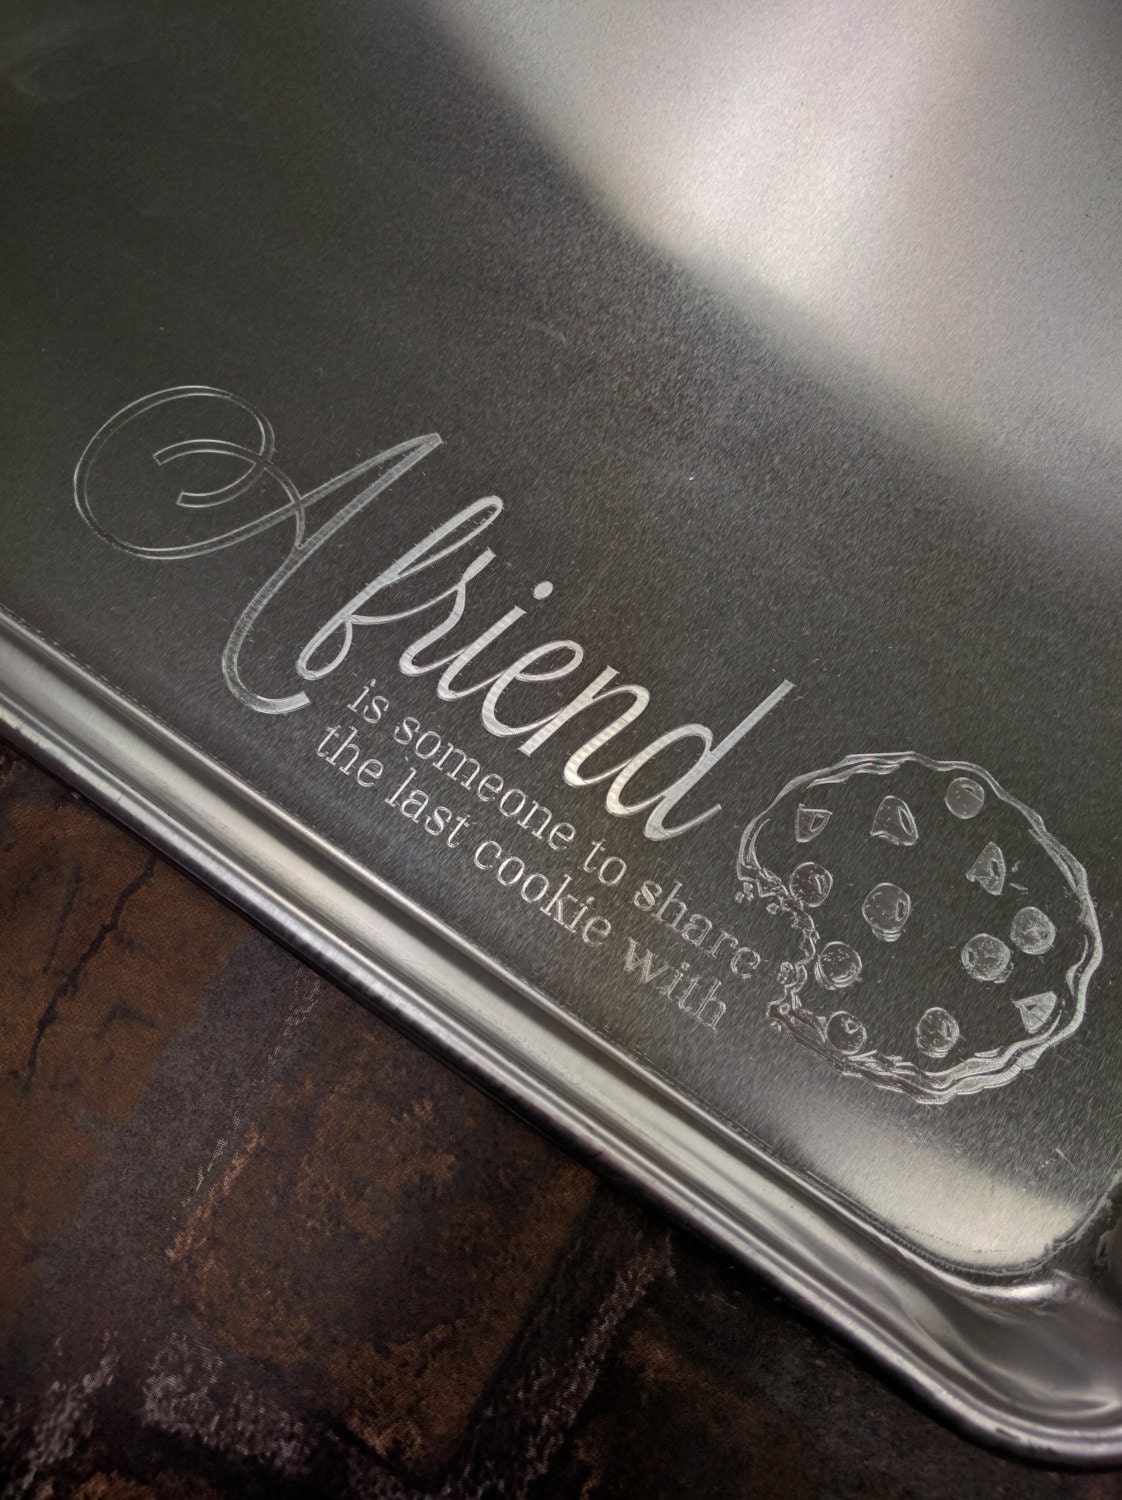 Engraved Cookie Sheet, Personalized Aluminum Baking Sheet, Engraved Sheet  Pan, Custom Cookie Pan, Sheet Tray, Oven Baking Pan, Baker Gift 